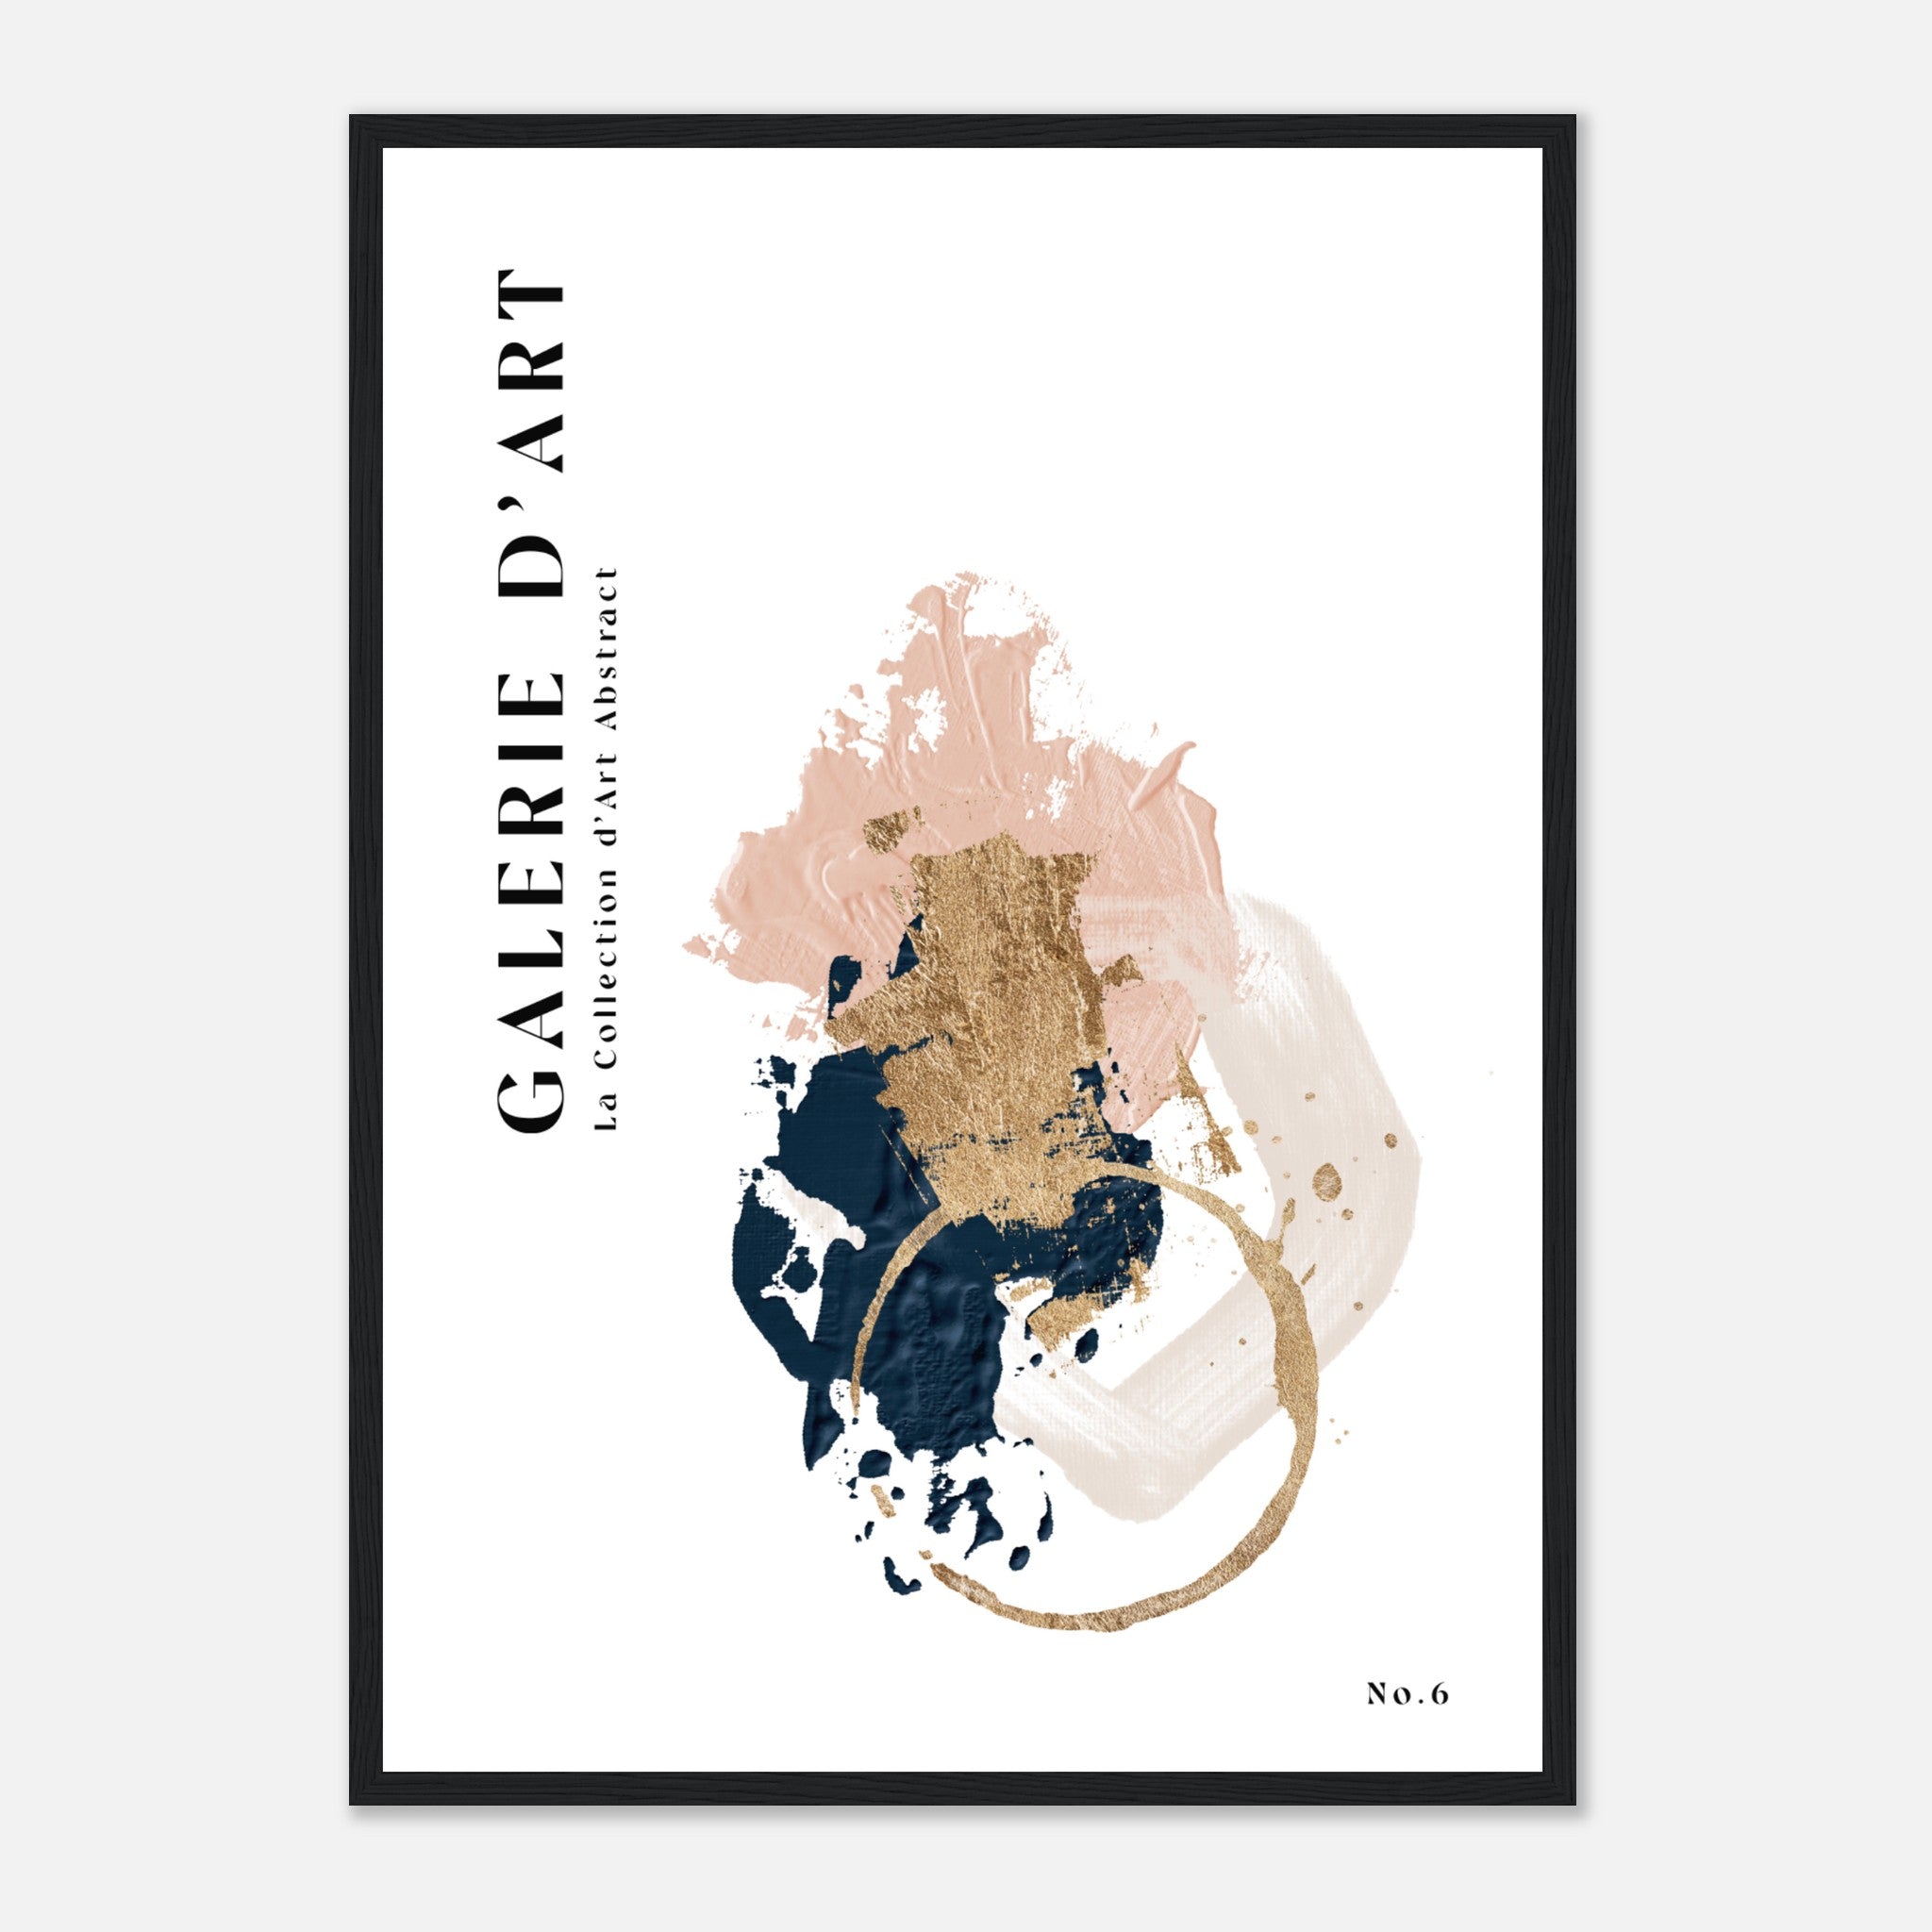 Galerie Art Abstract No. 6 Poster